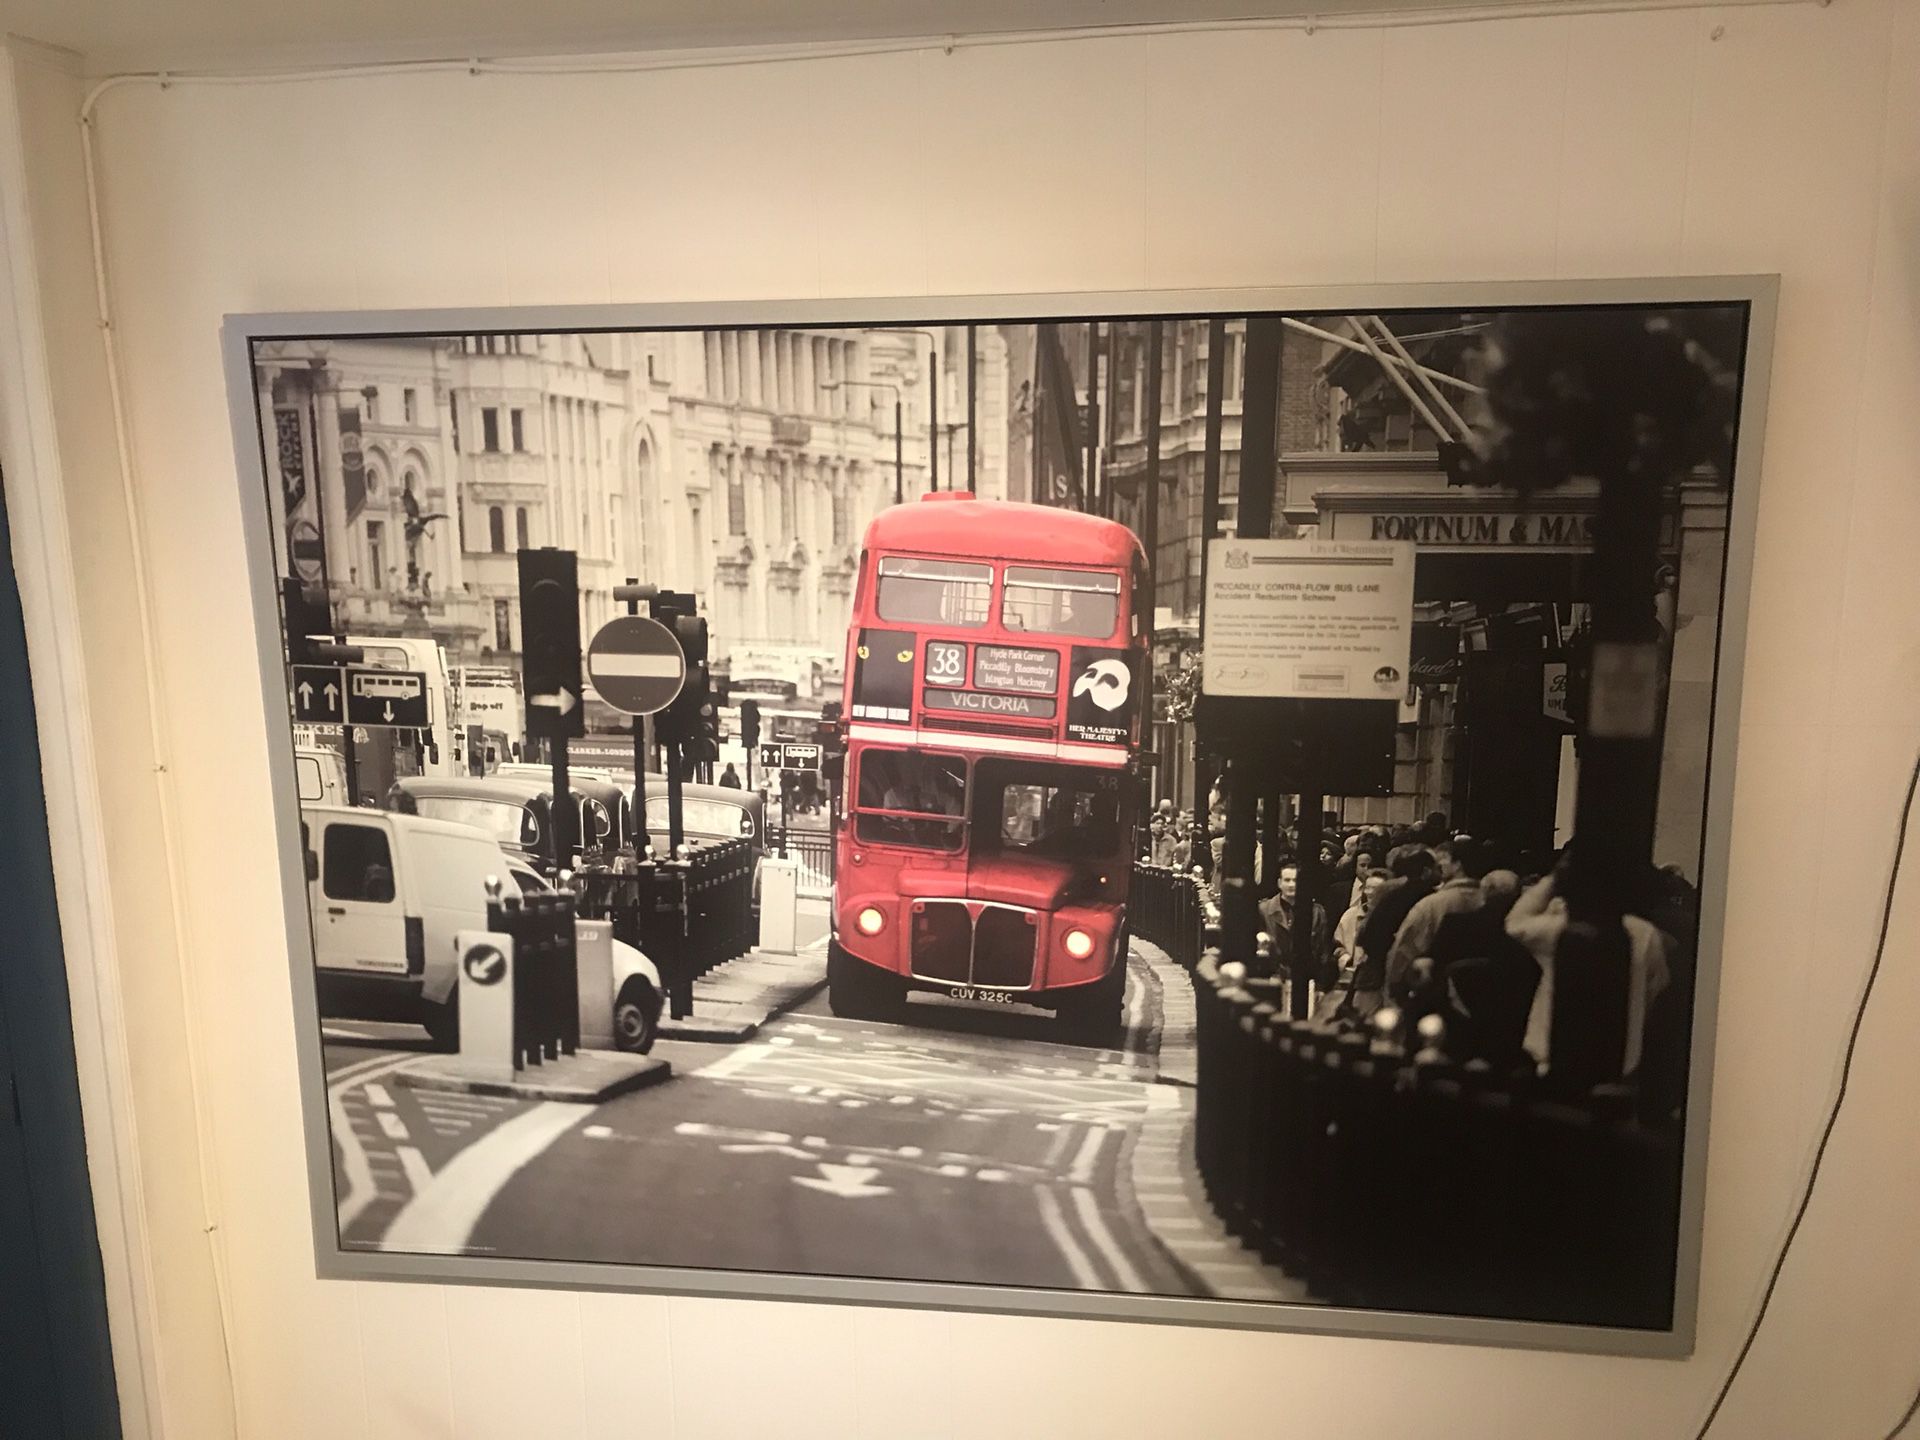 Incredible London Bus picture Framed 55x40 Inches.